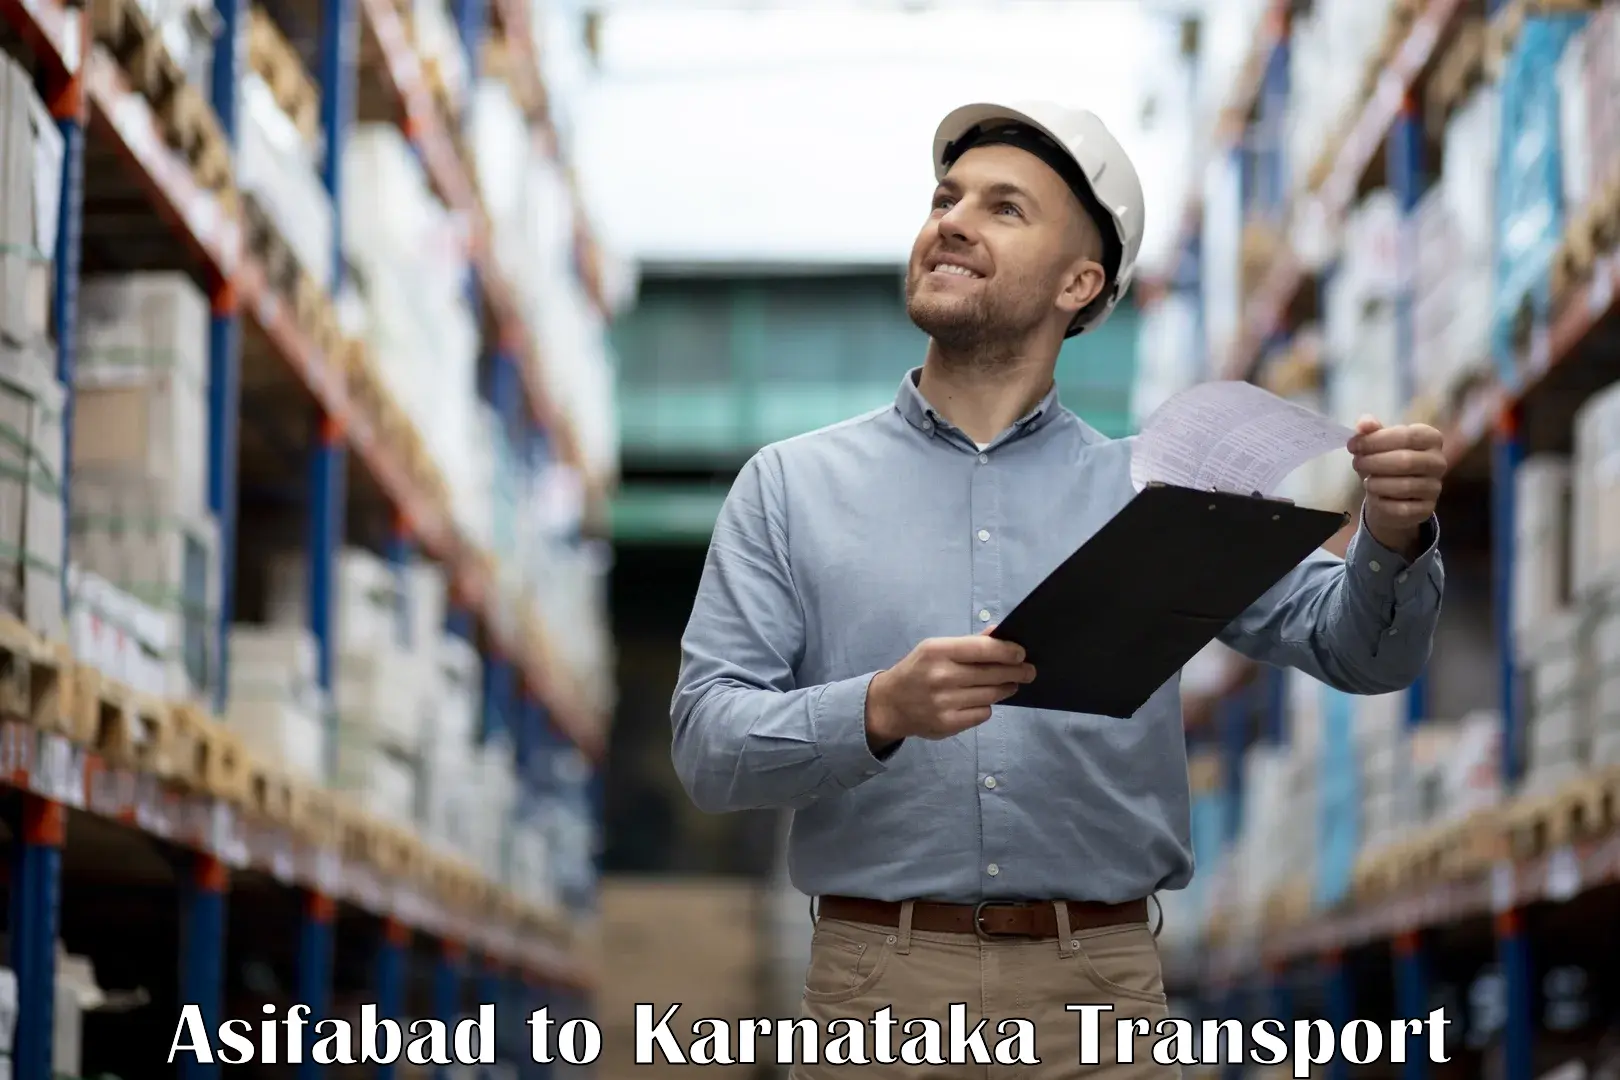 Goods delivery service Asifabad to Davangere